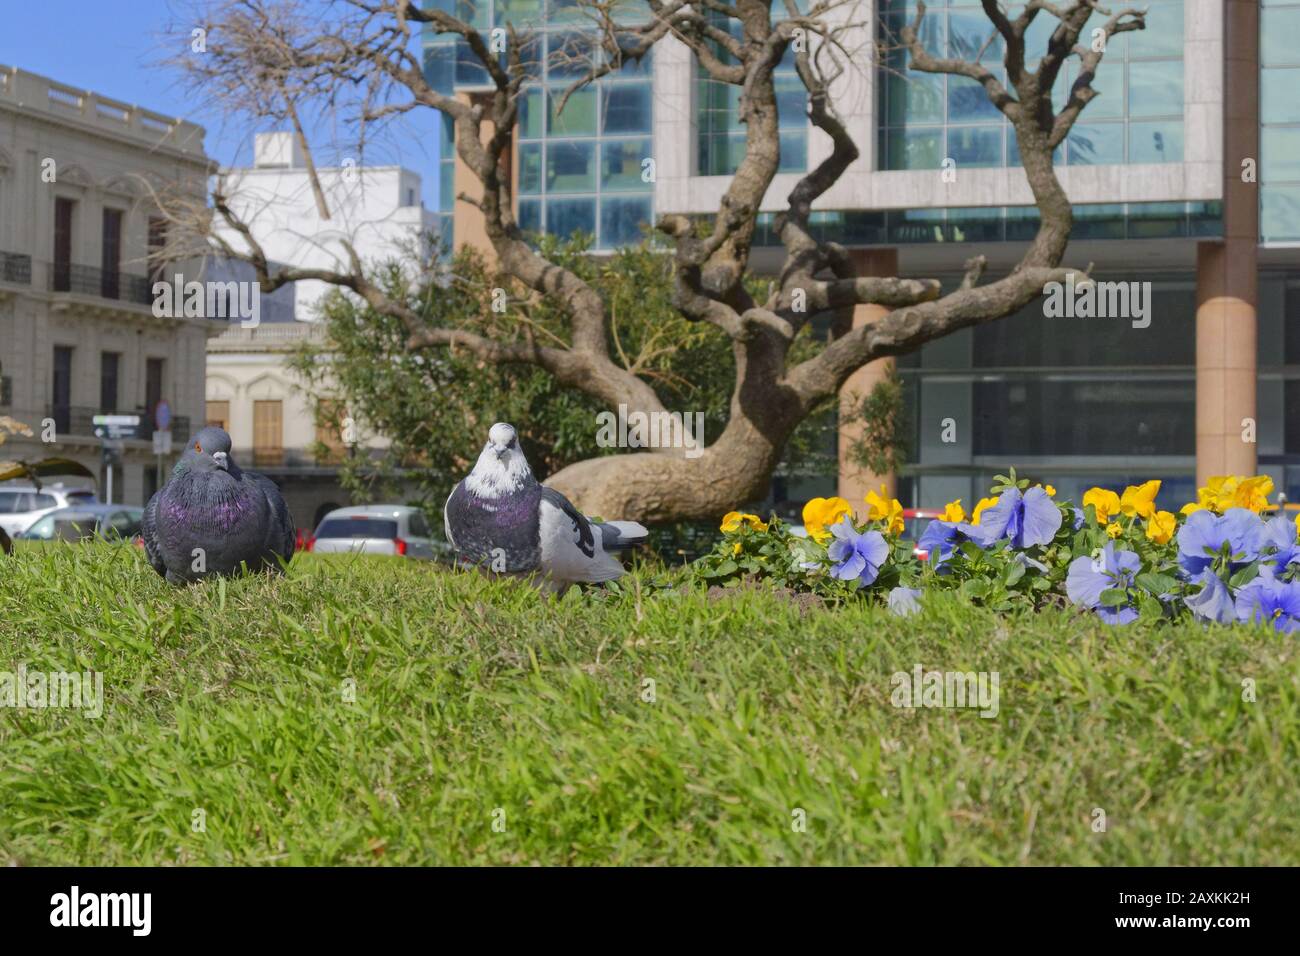 Wide angle shot of pigeons and flowers behind a tree surrounded by buildings Stock Photo